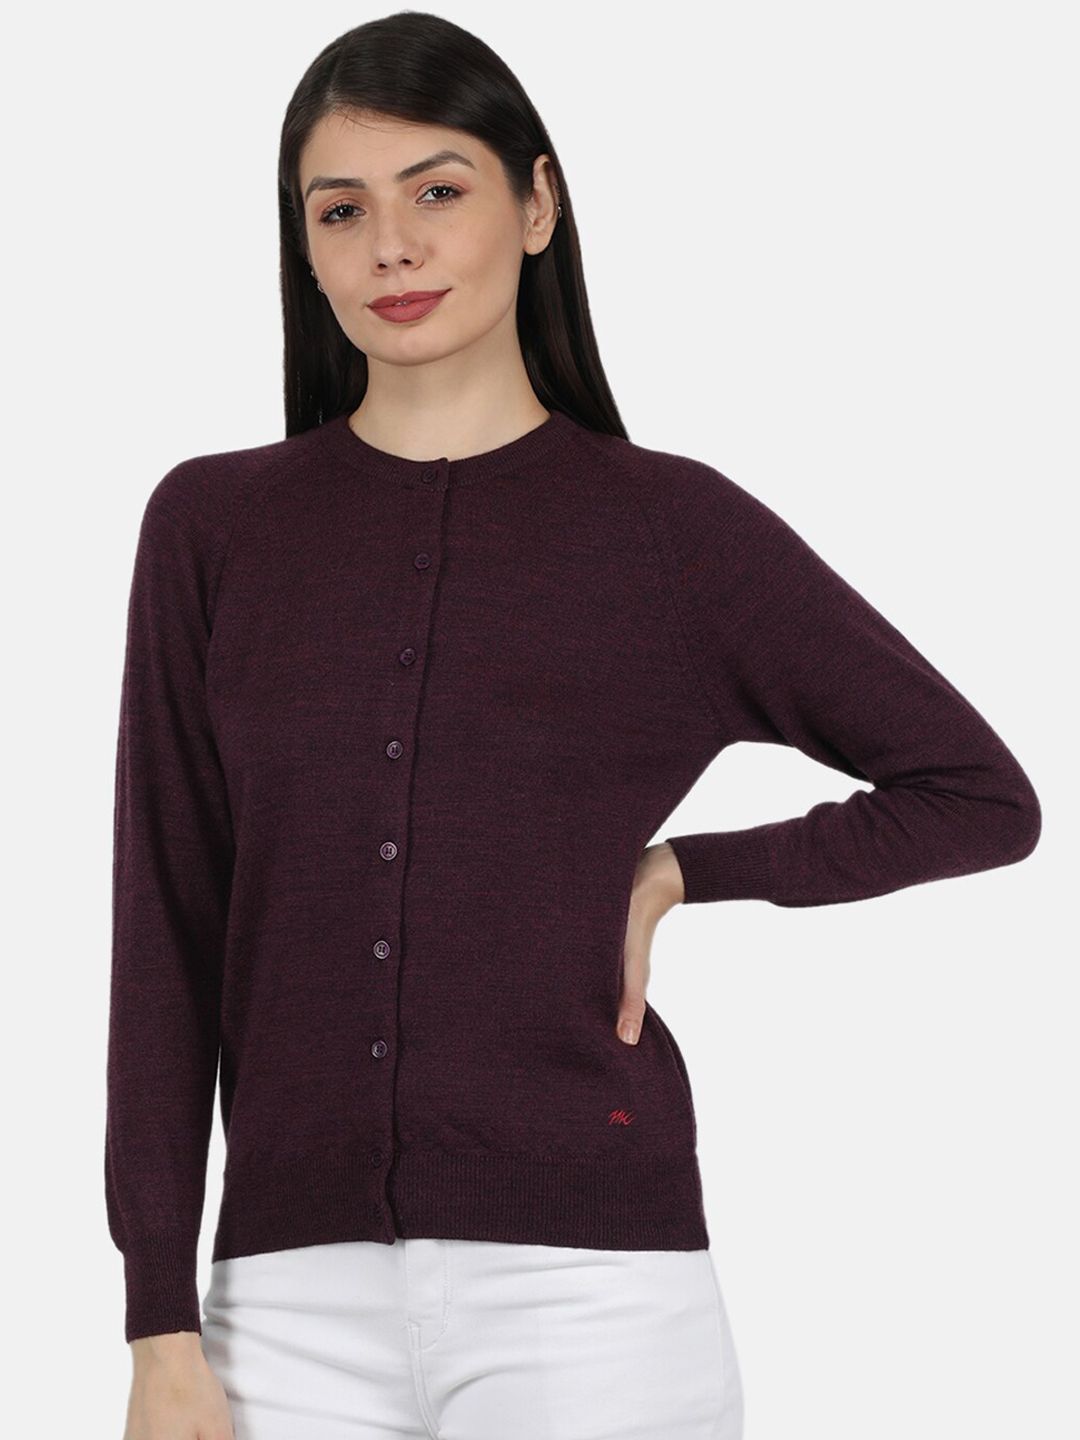 Monte Carlo Women's Maroon Solid Pure Wool Round Neck Cardigan Price in India